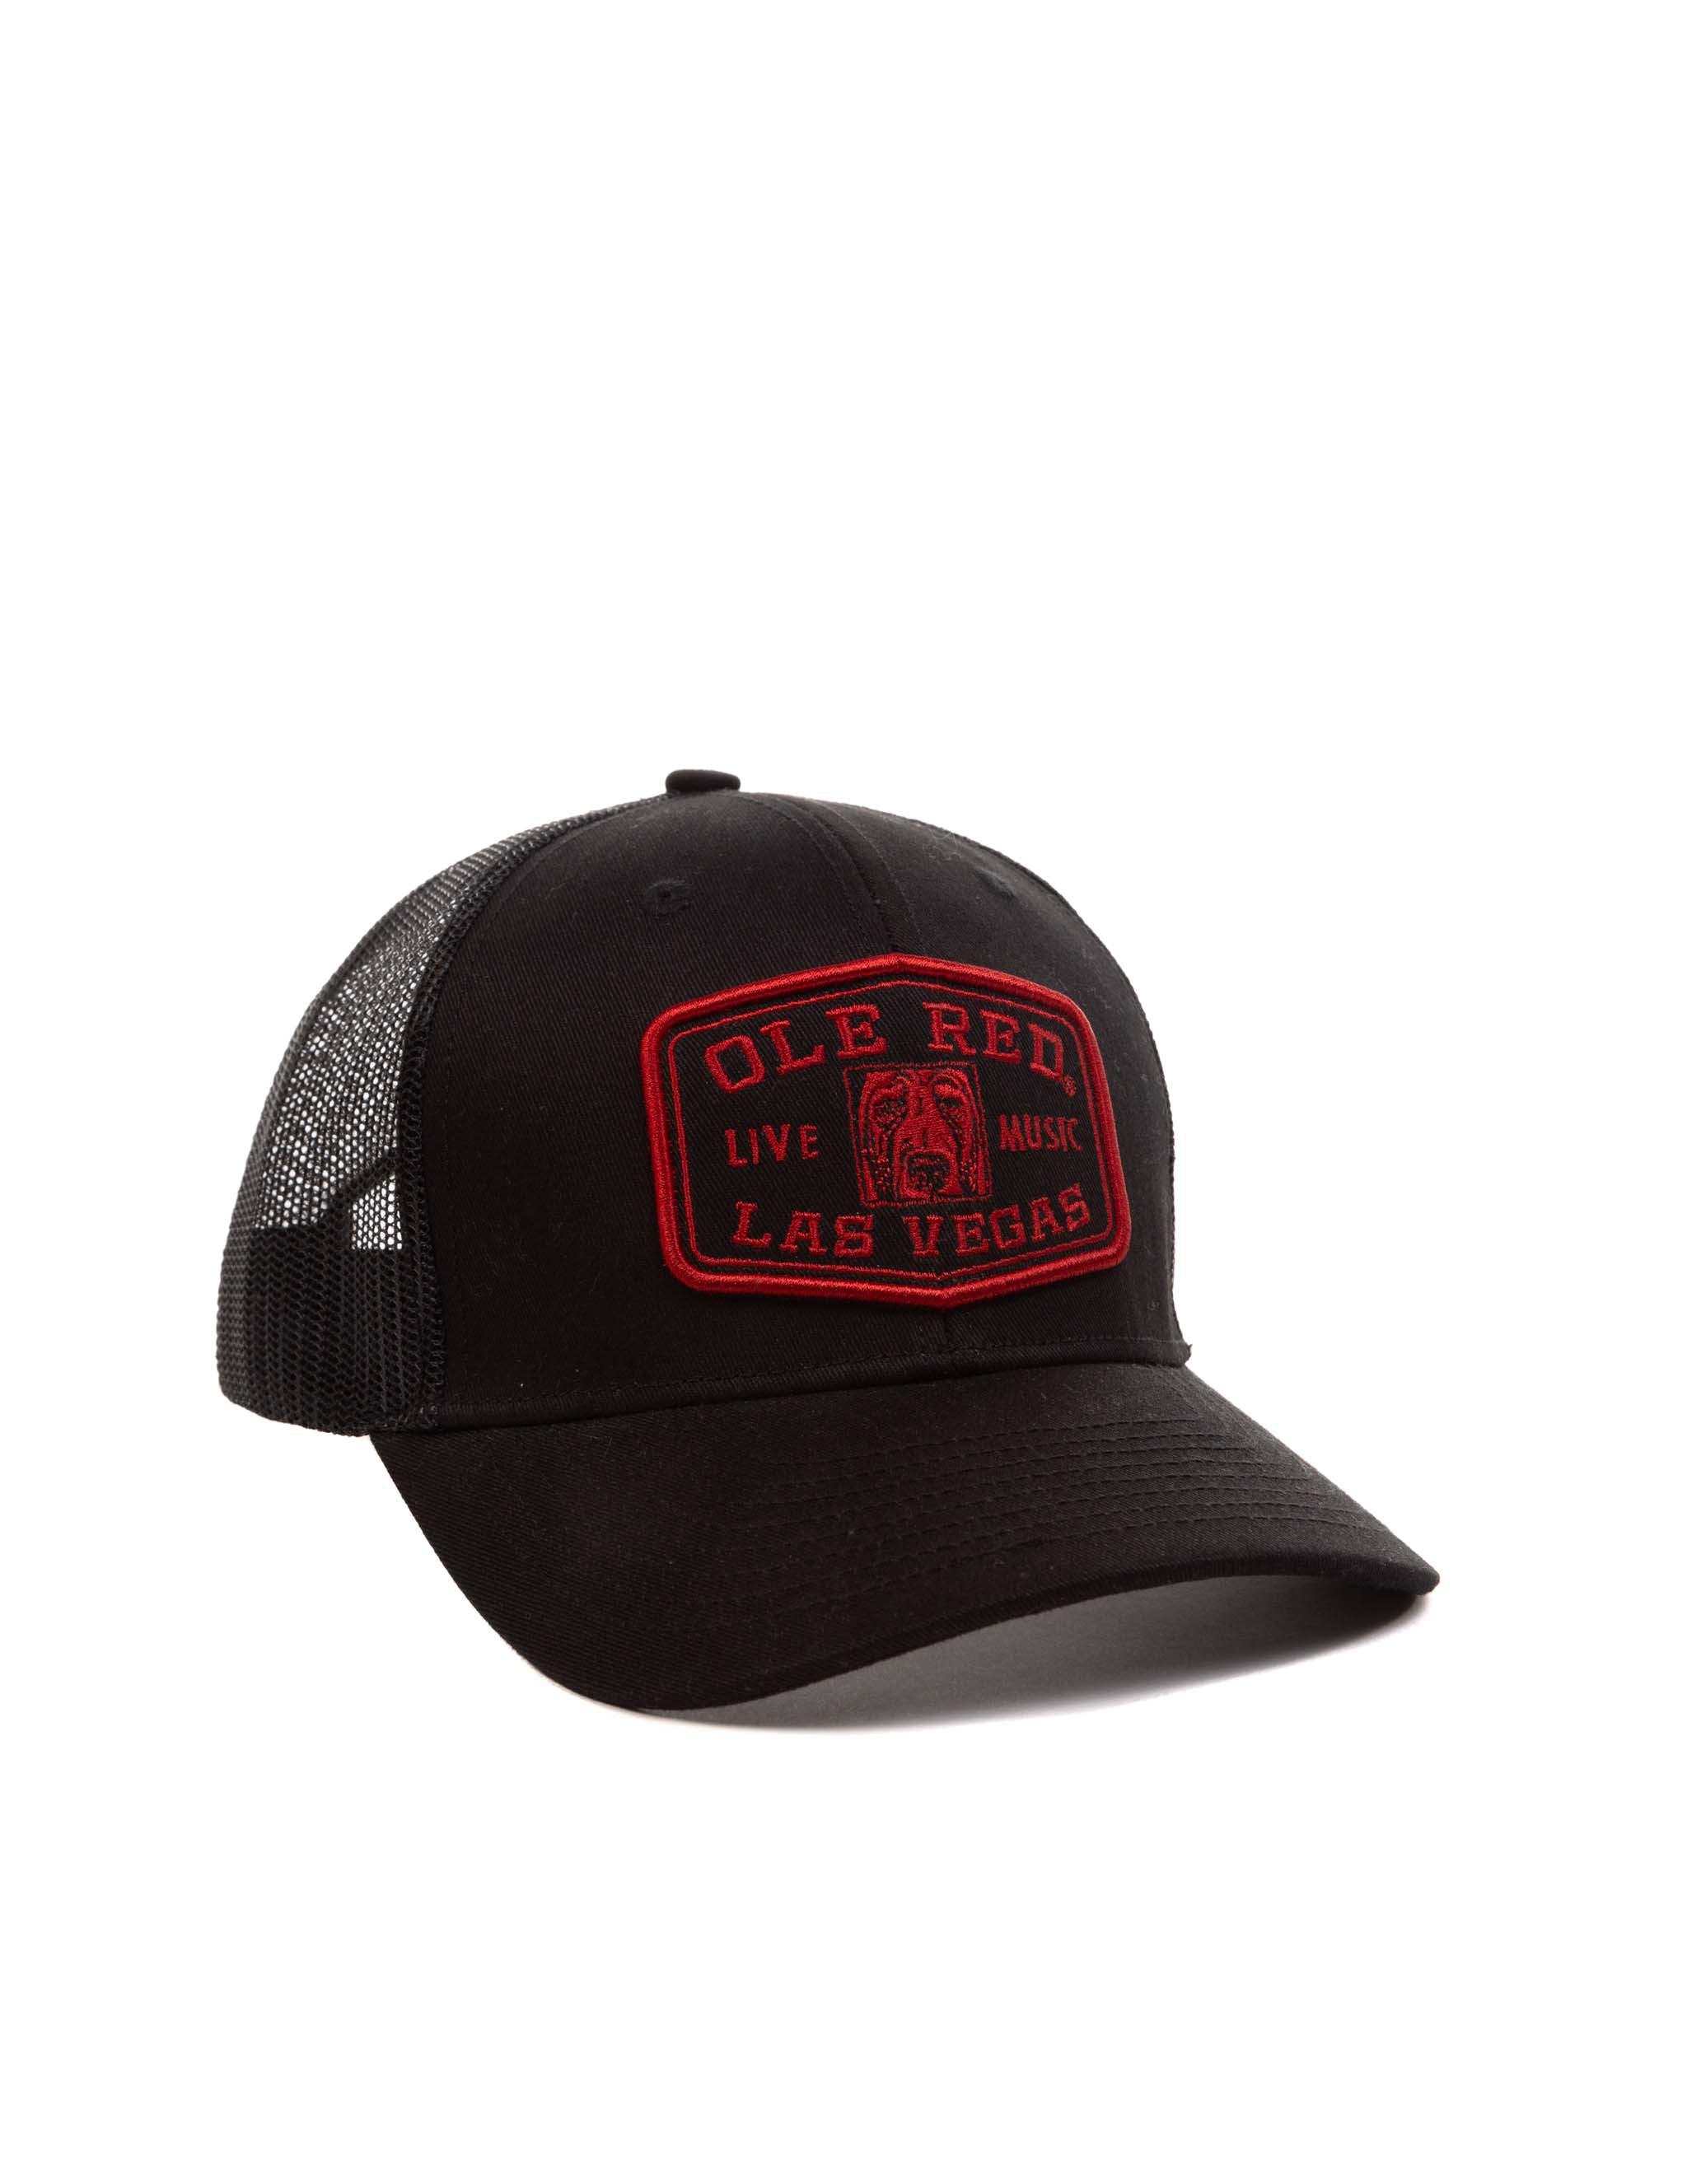 Ole Red Vegas Live Music Hat